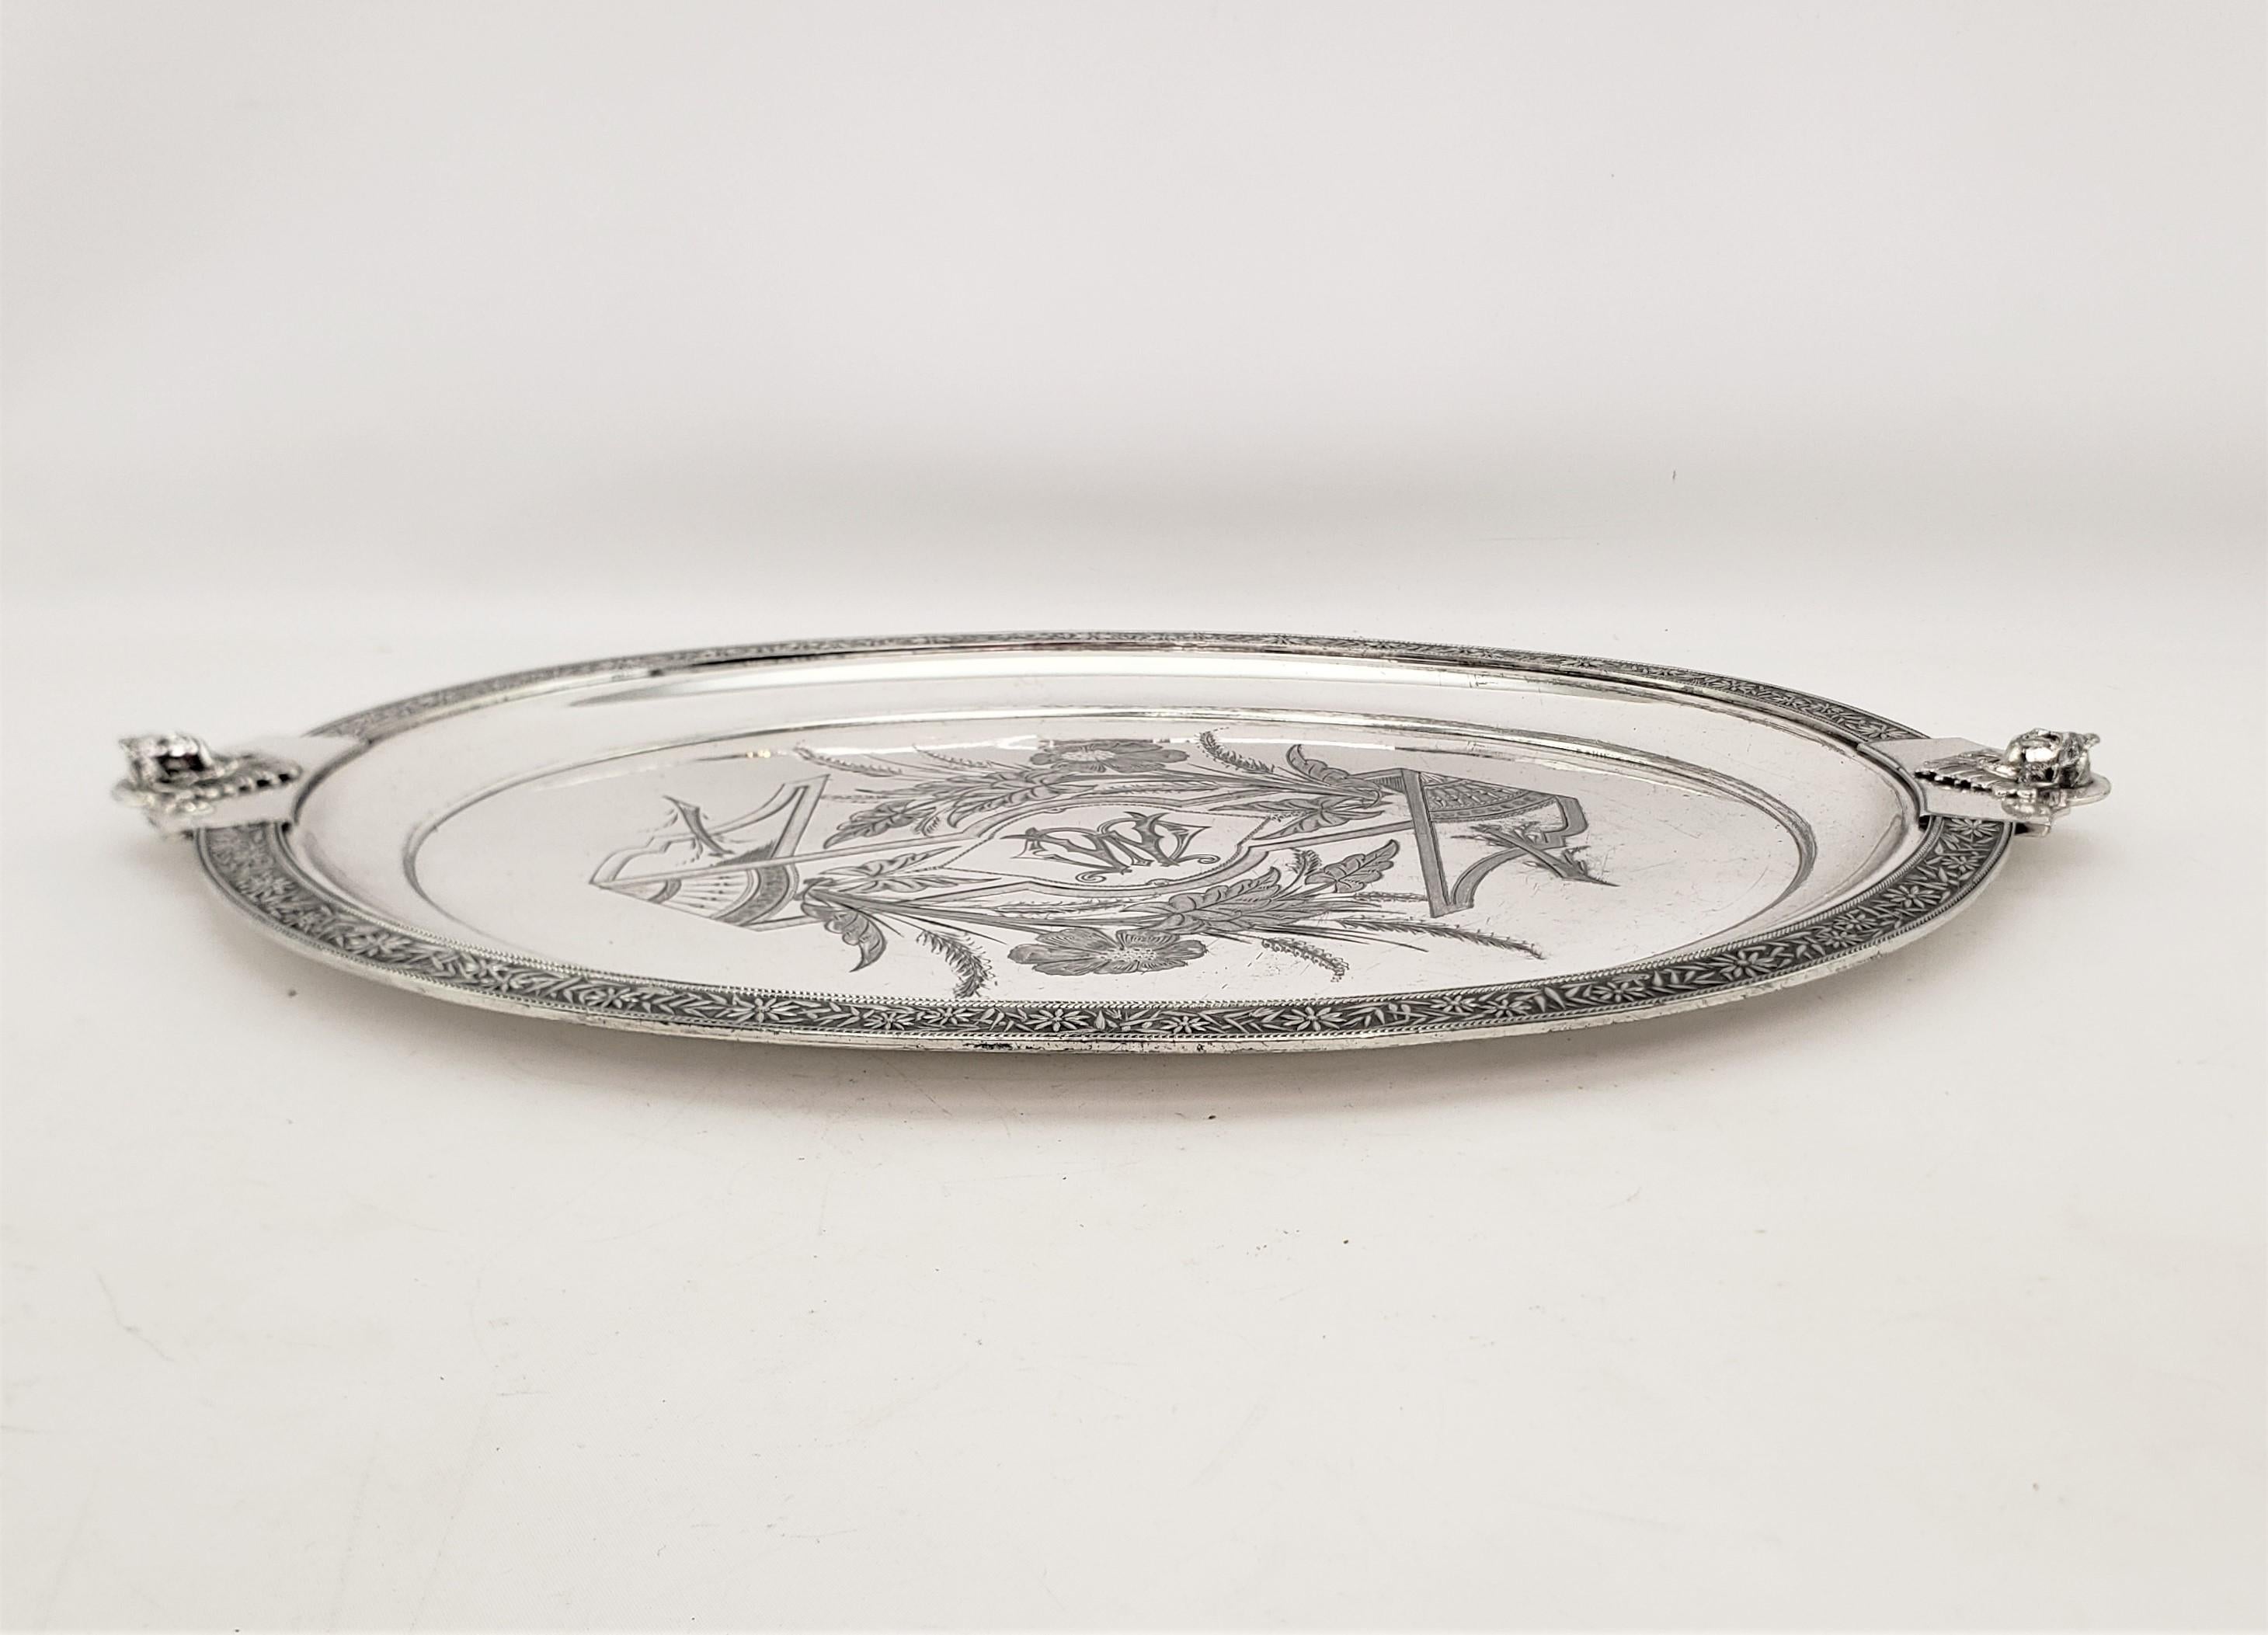 Antique English Silver Plated Serving Tray with Neoclassical Styled Decoration For Sale 2